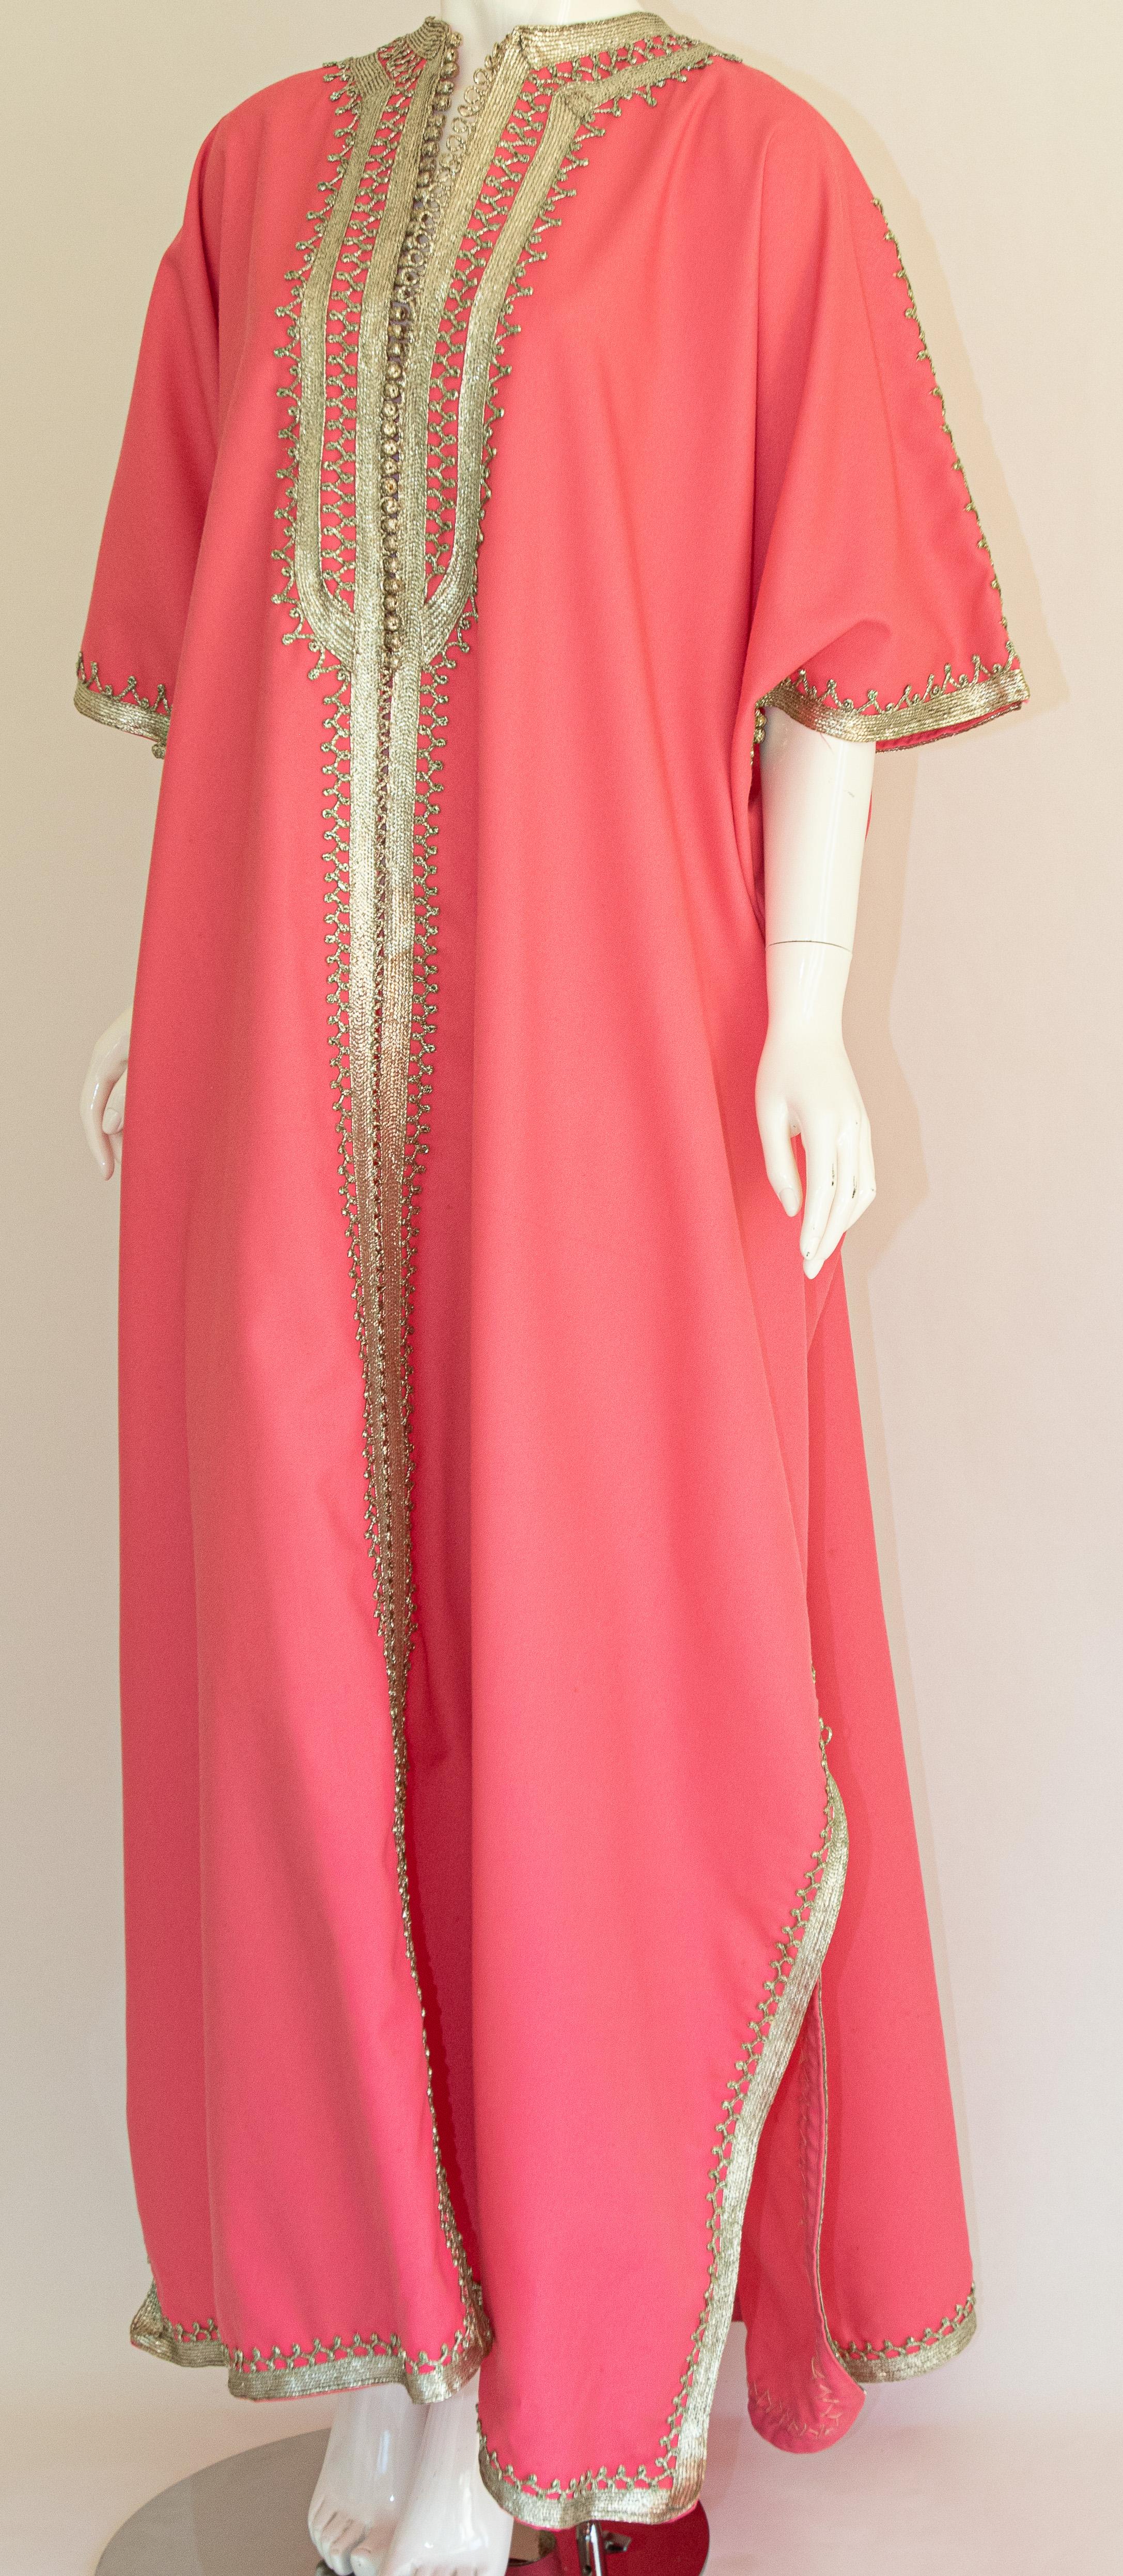 Embroidered Moroccan Caftan Pink Color with Silver Trim, Vintage Kaftan circa 1970 For Sale